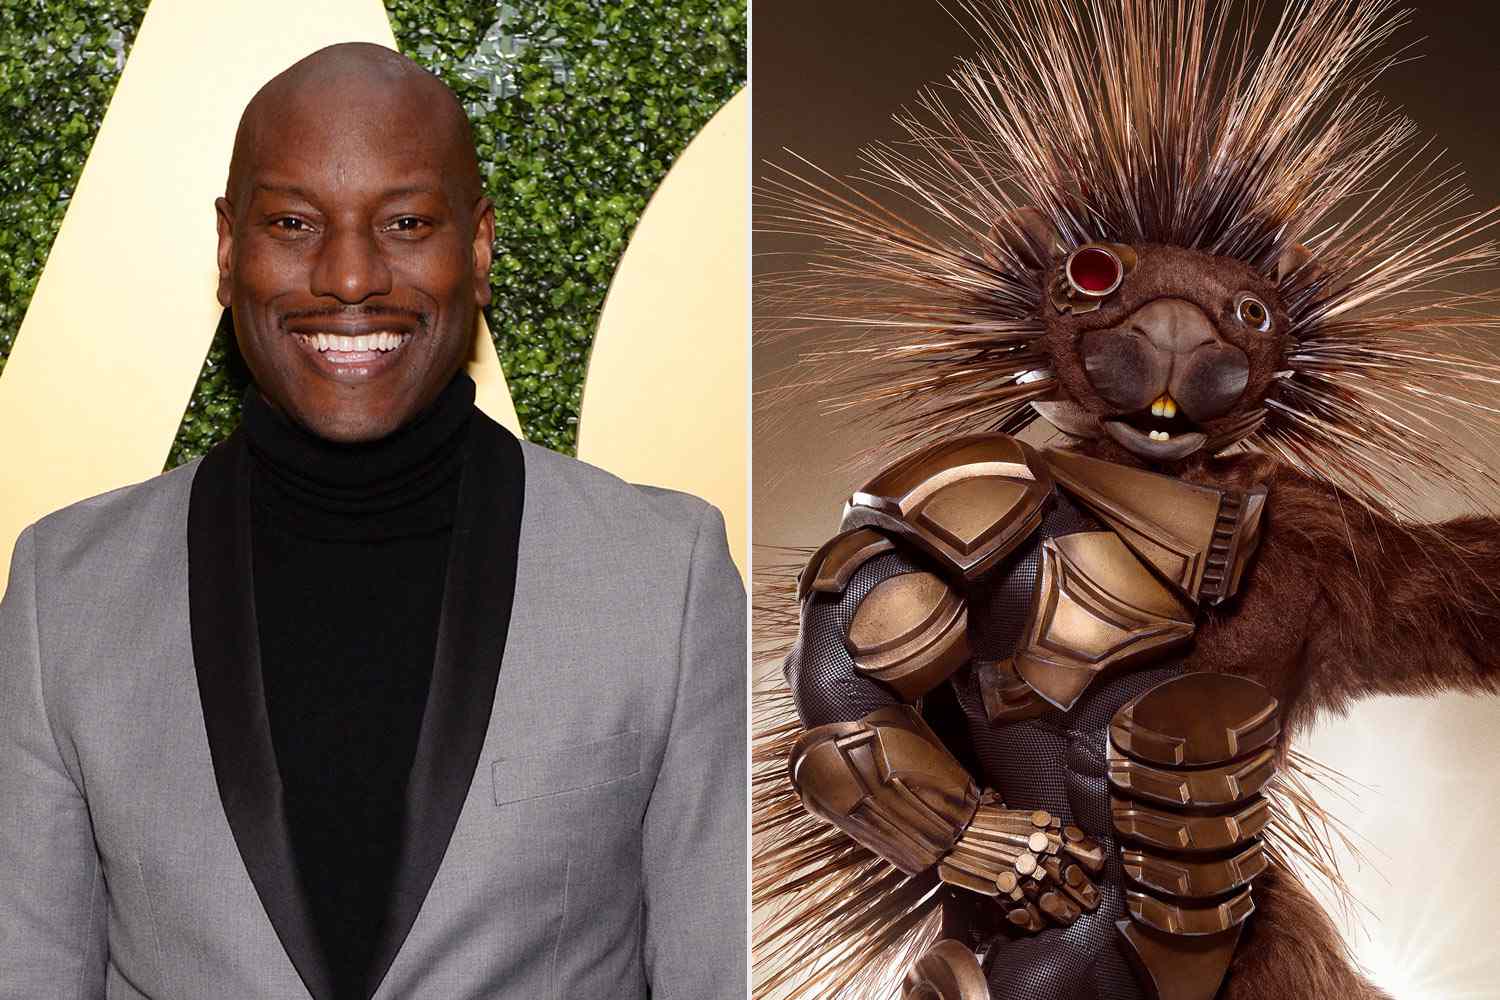 Tyrese and robopine